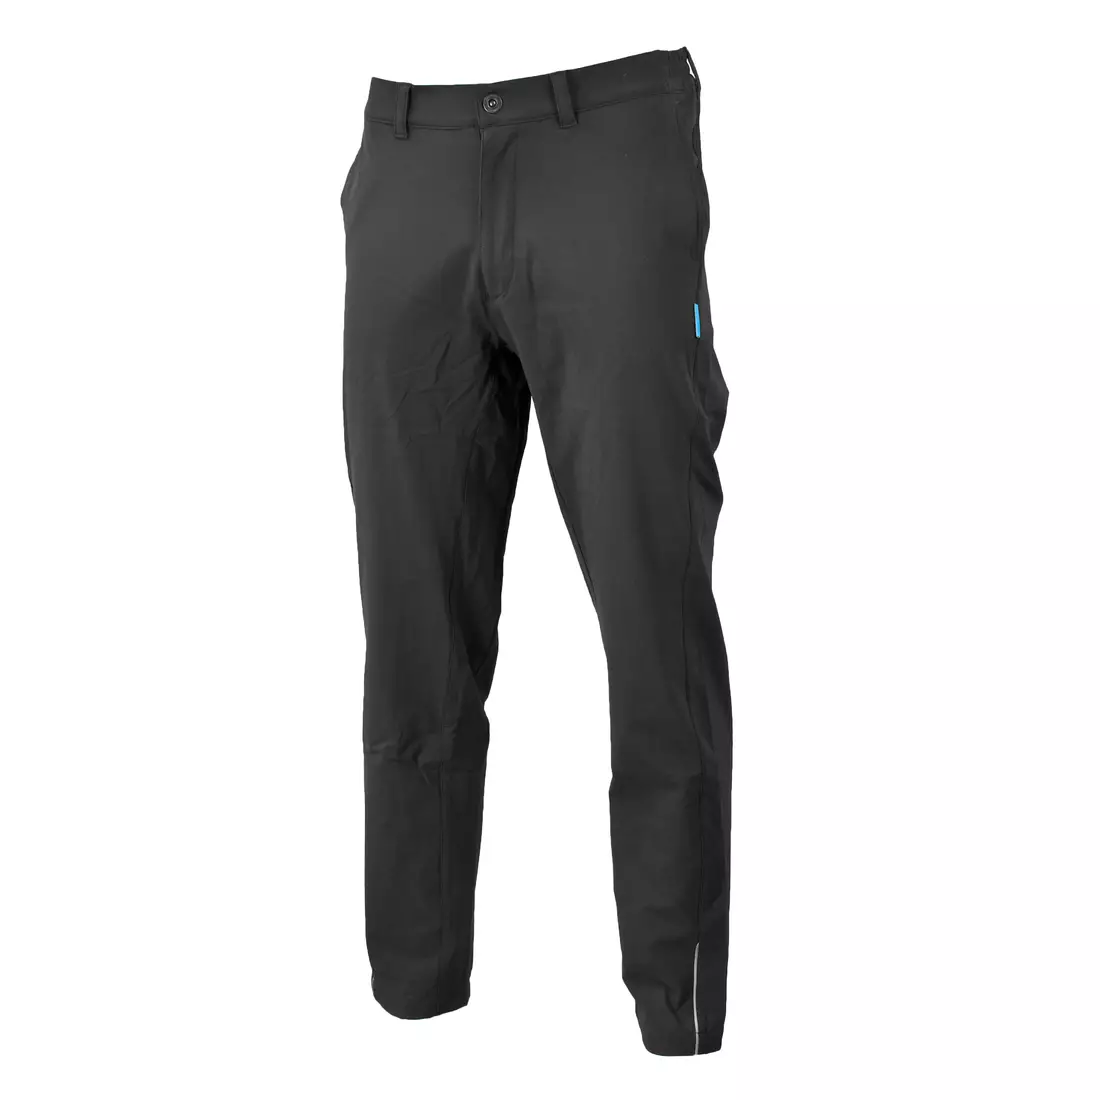 SHIMANO CWPATWLS16UL Insulated Comfort Pants - insulated cycling pants